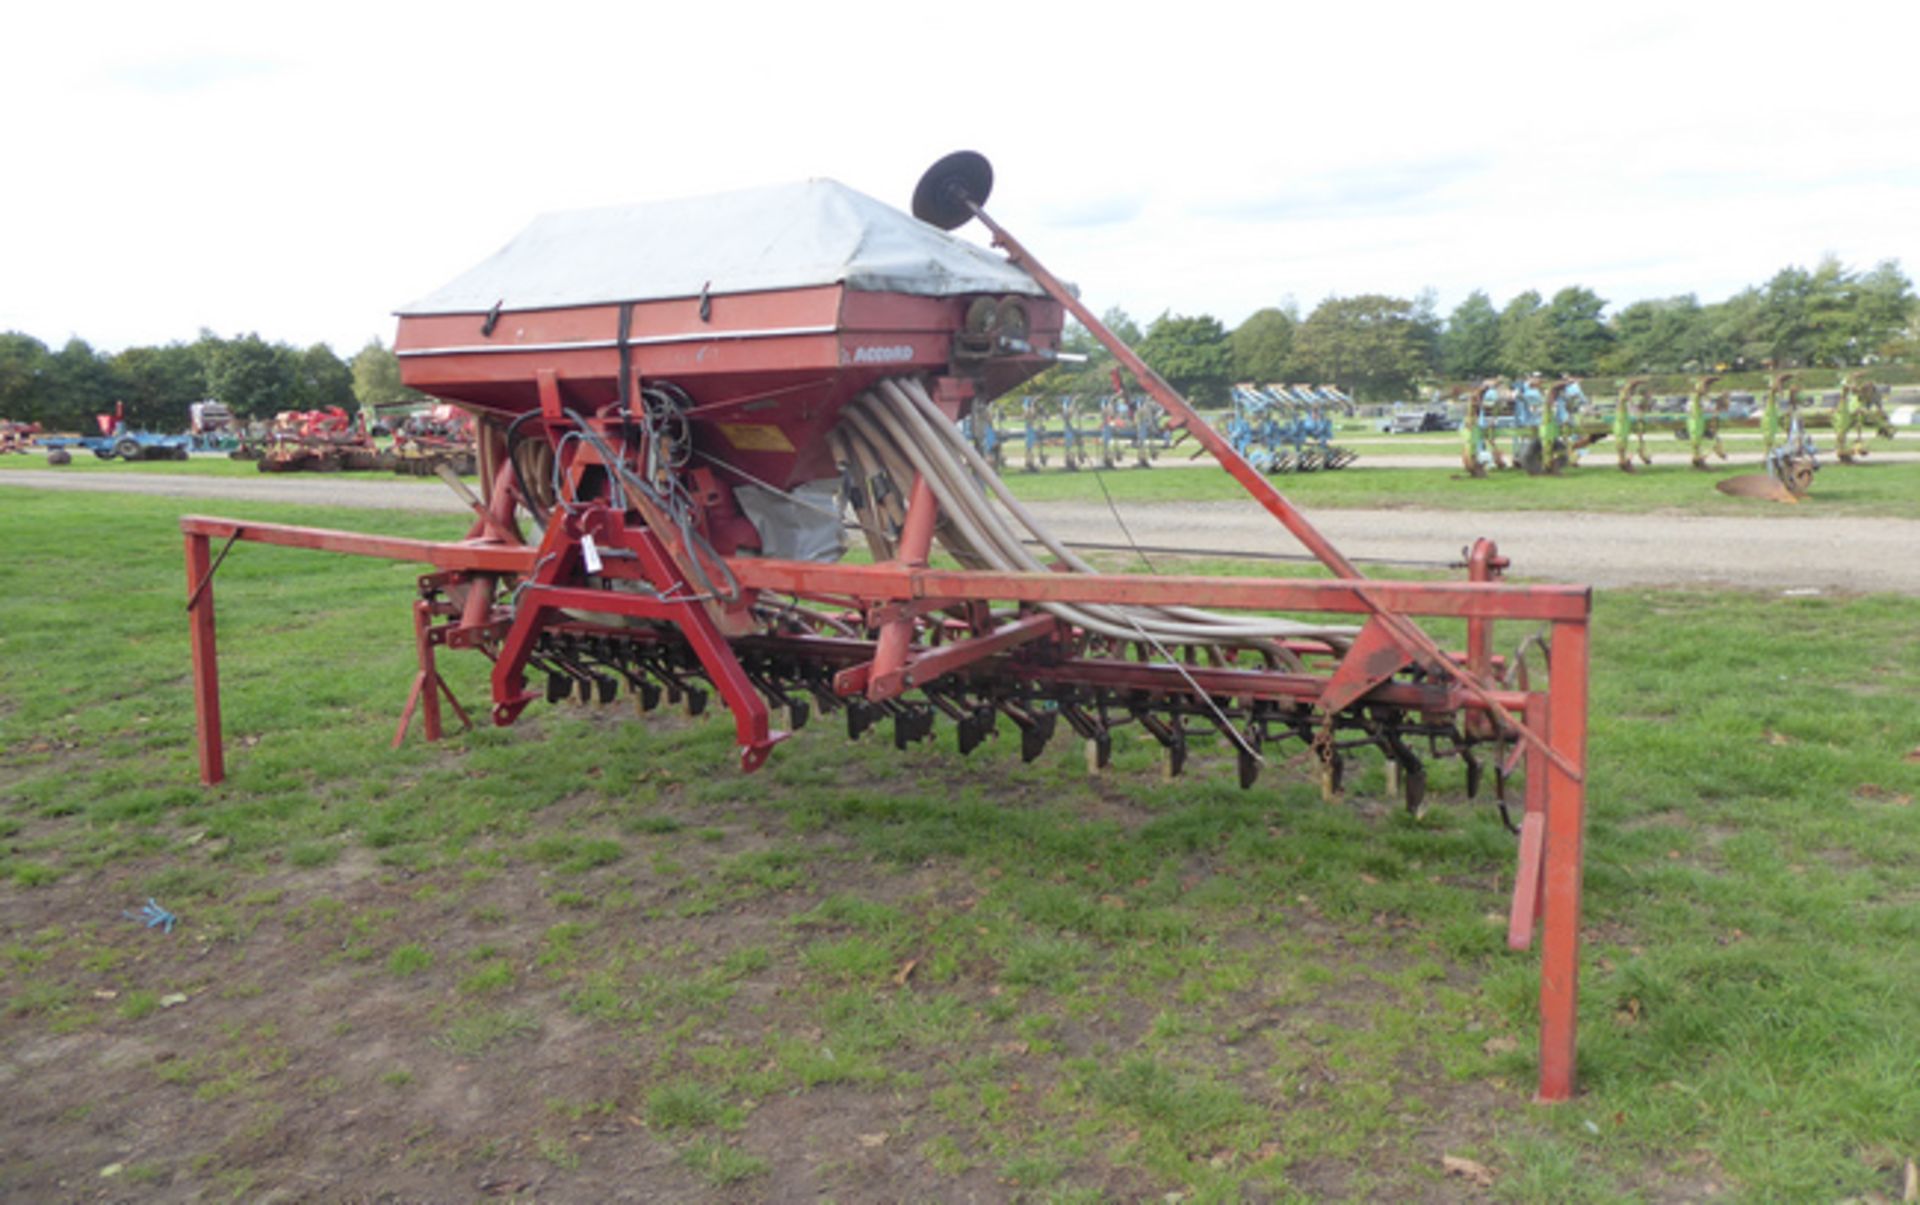 Accord DA 4m seed drill with A frame & following harrow, pulley parts etc in hopper